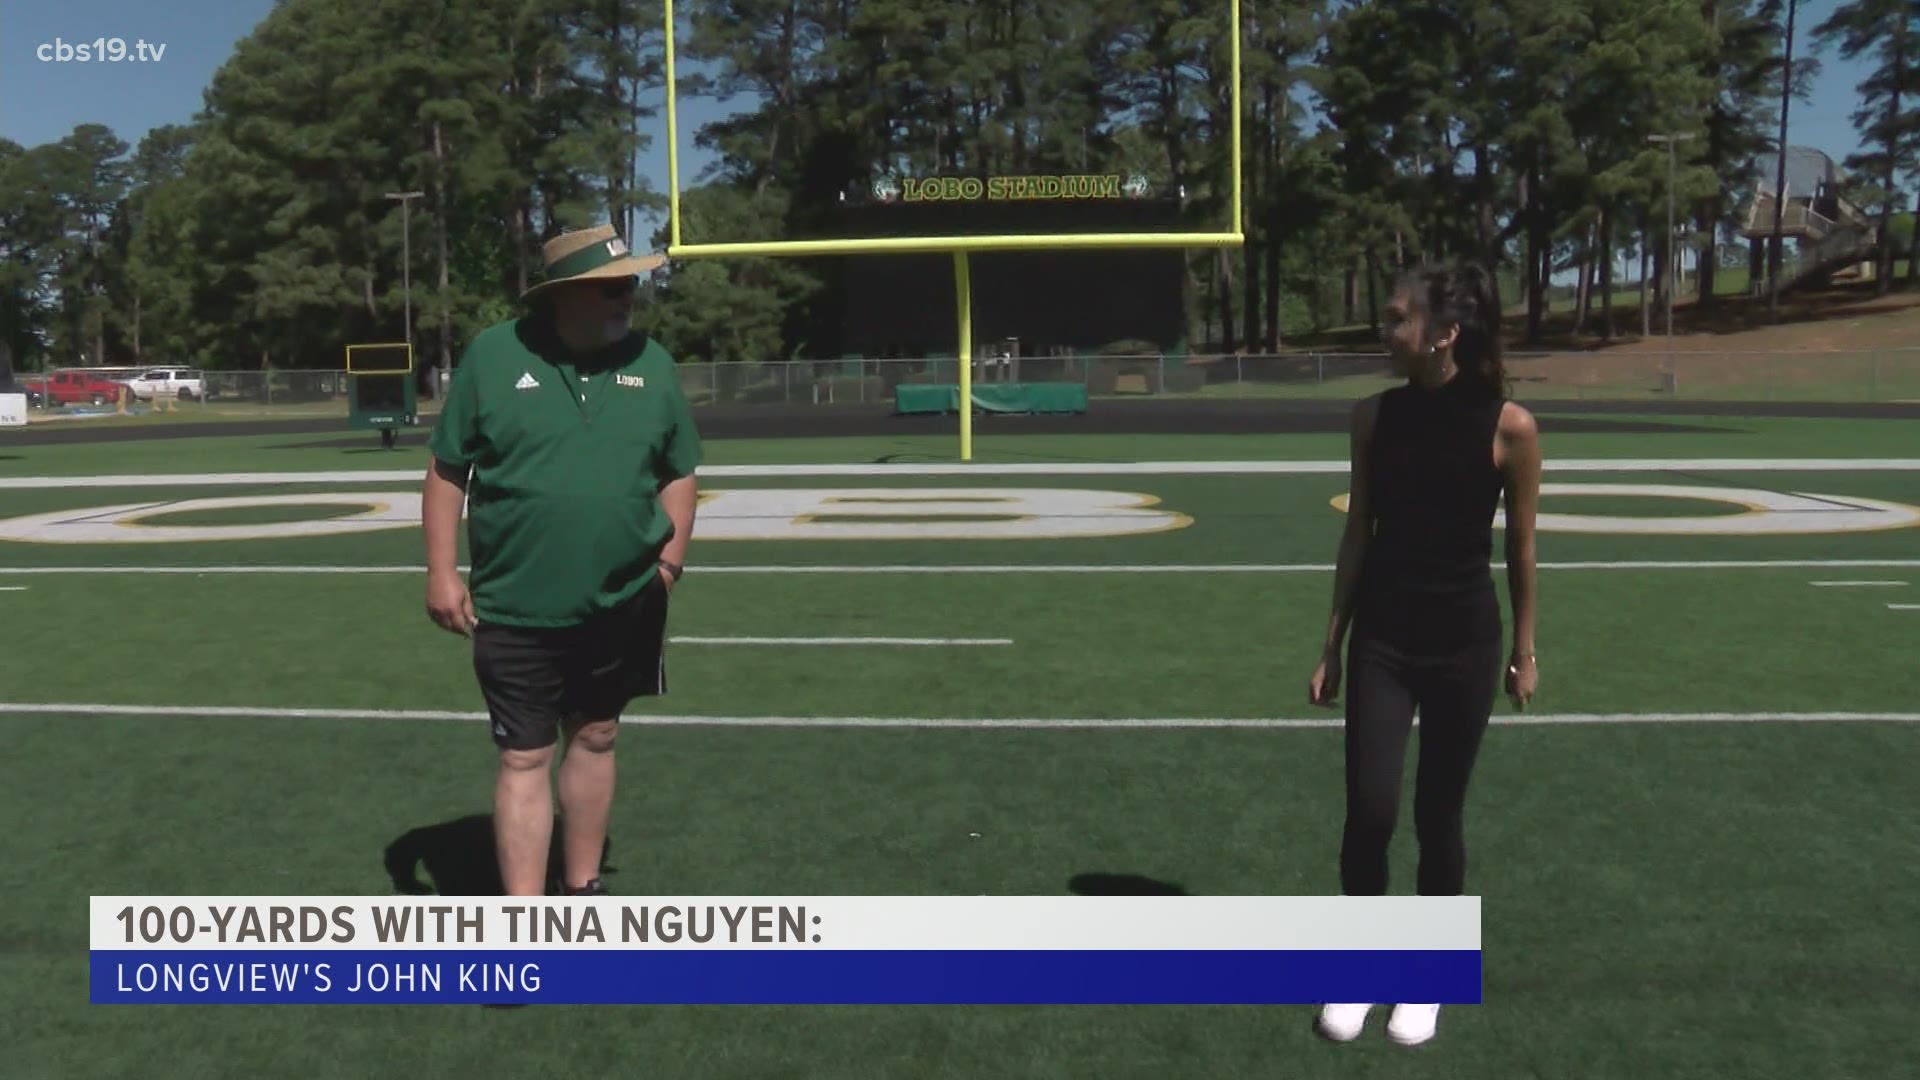 Longview head football coach John King joins CBS19 Sports for another edition of 100-Yards with Tina Nguyen.